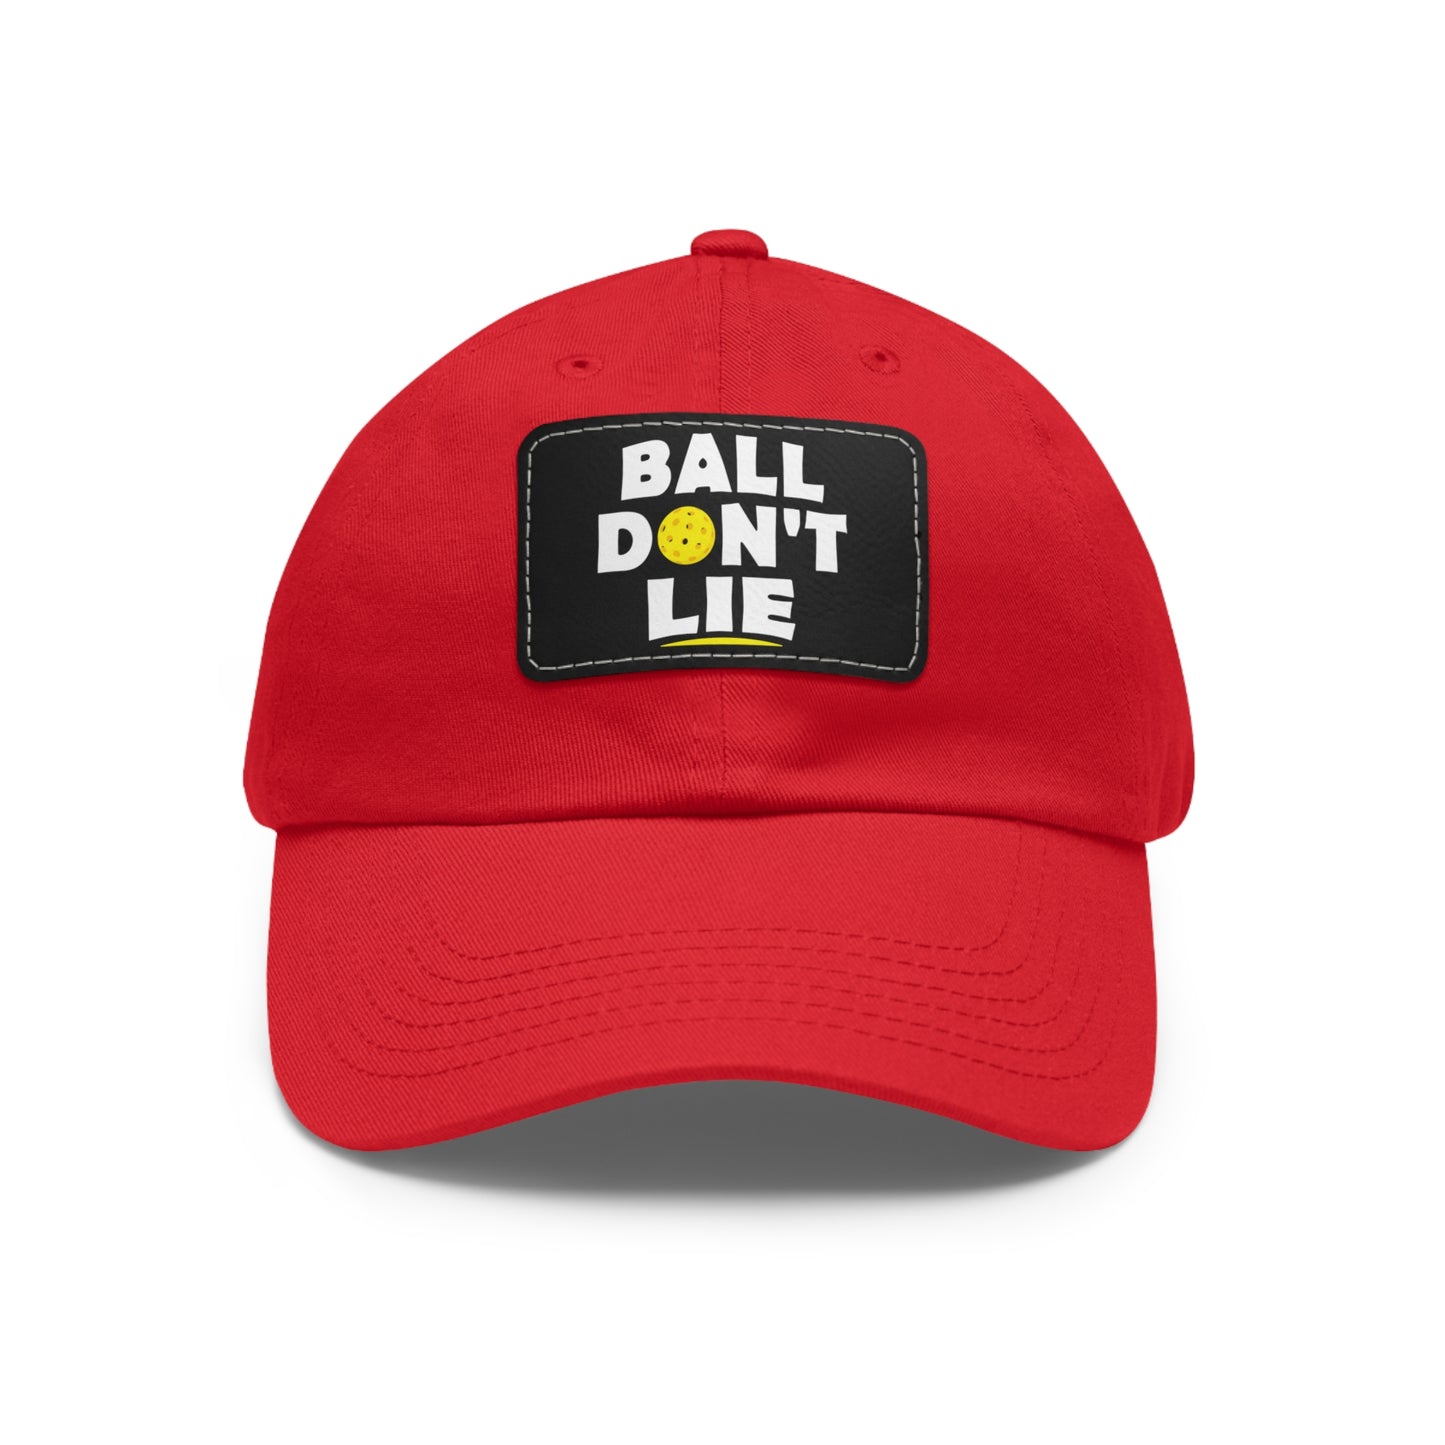 Ball Don't Lie Pickleball Hat with Leather Patch